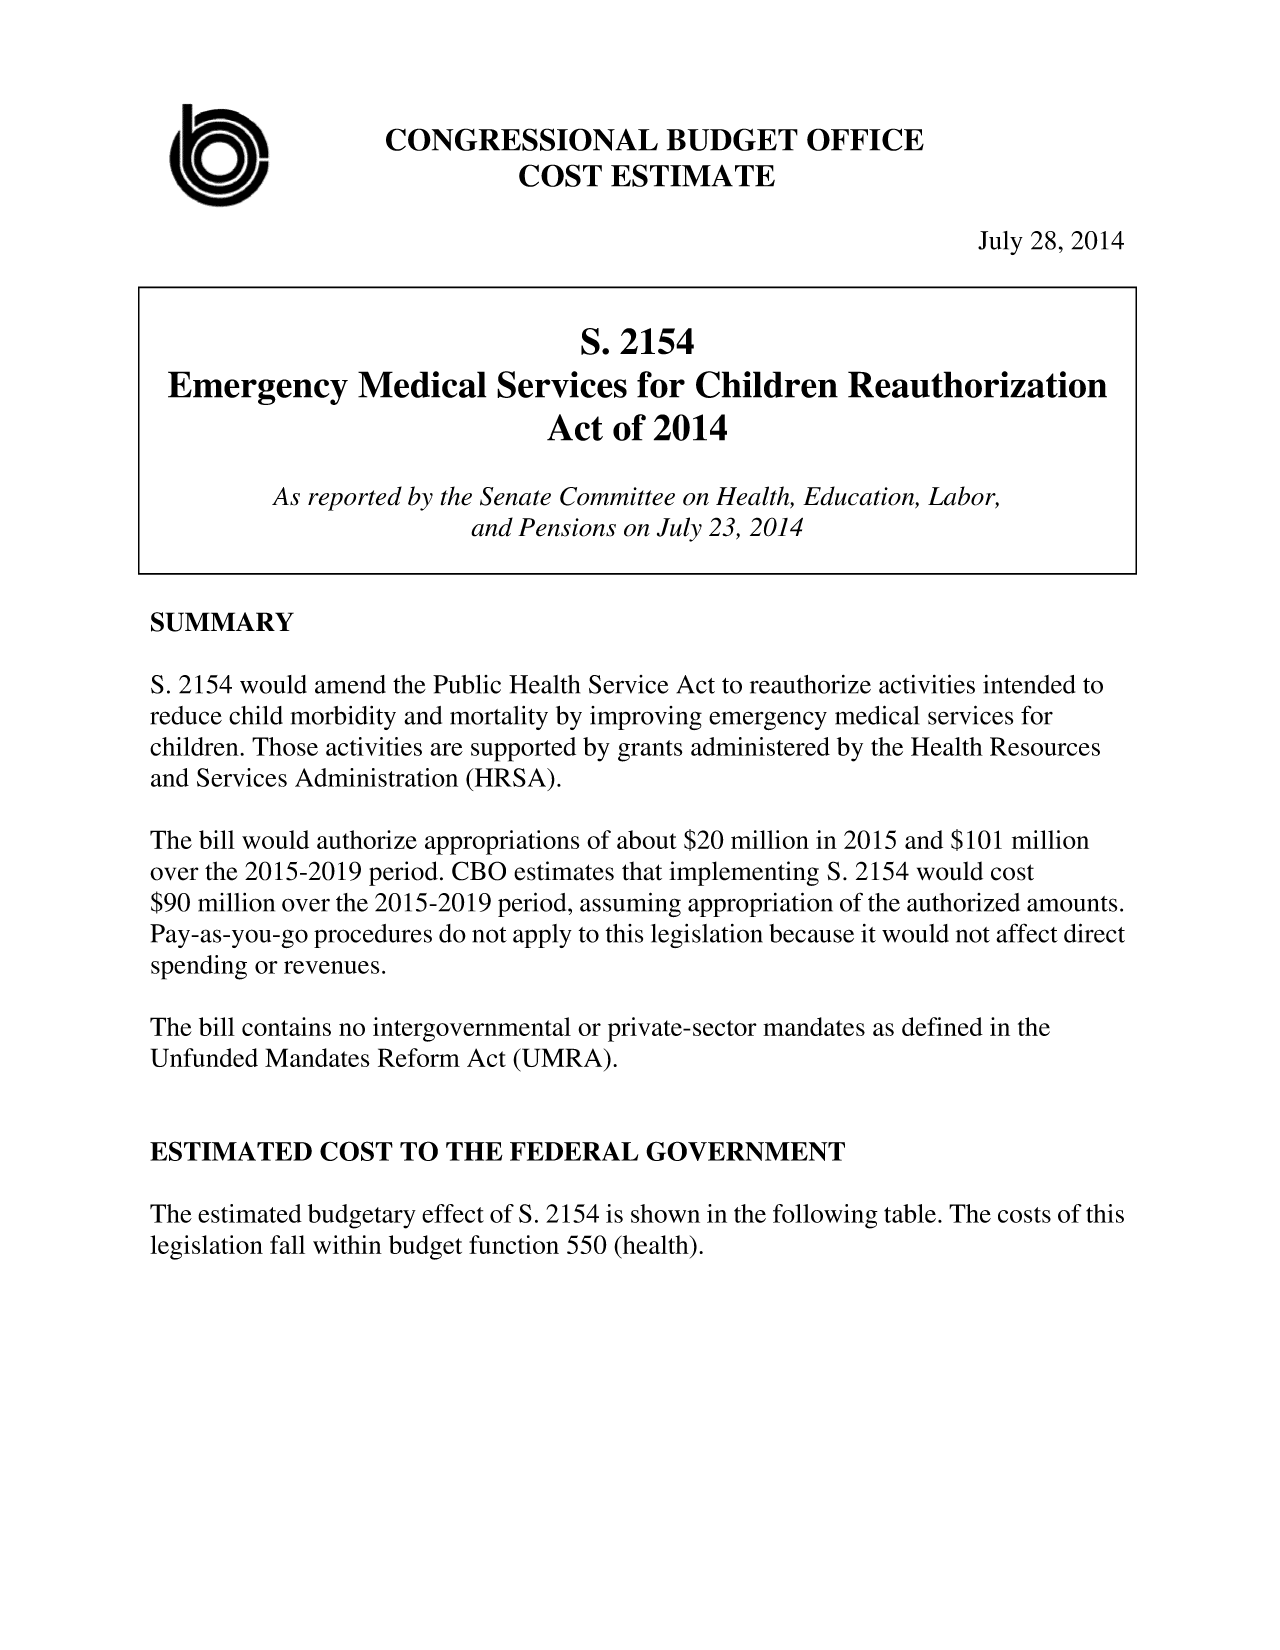 handle is hein.congrec/cbo1822 and id is 1 raw text is: CONGRESSIONAL BUDGET OFFICE
COST ESTIMATE

July 28, 2014

S. 2154
Emergency Medical Services for Children Reauthorization
Act of 2014
As reported by the Senate Committee on Health, Education, Labor,
and Pensions on July 23, 2014
SUMMARY
S. 2154 would amend the Public Health Service Act to reauthorize activities intended to
reduce child morbidity and mortality by improving emergency medical services for
children. Those activities are supported by grants administered by the Health Resources
and Services Administration (HRSA).
The bill would authorize appropriations of about $20 million in 2015 and $101 million
over the 2015-2019 period. CBO estimates that implementing S. 2154 would cost
$90 million over the 2015-2019 period, assuming appropriation of the authorized amounts.
Pay-as-you-go procedures do not apply to this legislation because it would not affect direct
spending or revenues.
The bill contains no intergovernmental or private-sector mandates as defined in the
Unfunded Mandates Reform Act (UMRA).
ESTIMATED COST TO THE FEDERAL GOVERNMENT
The estimated budgetary effect of S. 2154 is shown in the following table. The costs of this
legislation fall within budget function 550 (health).


